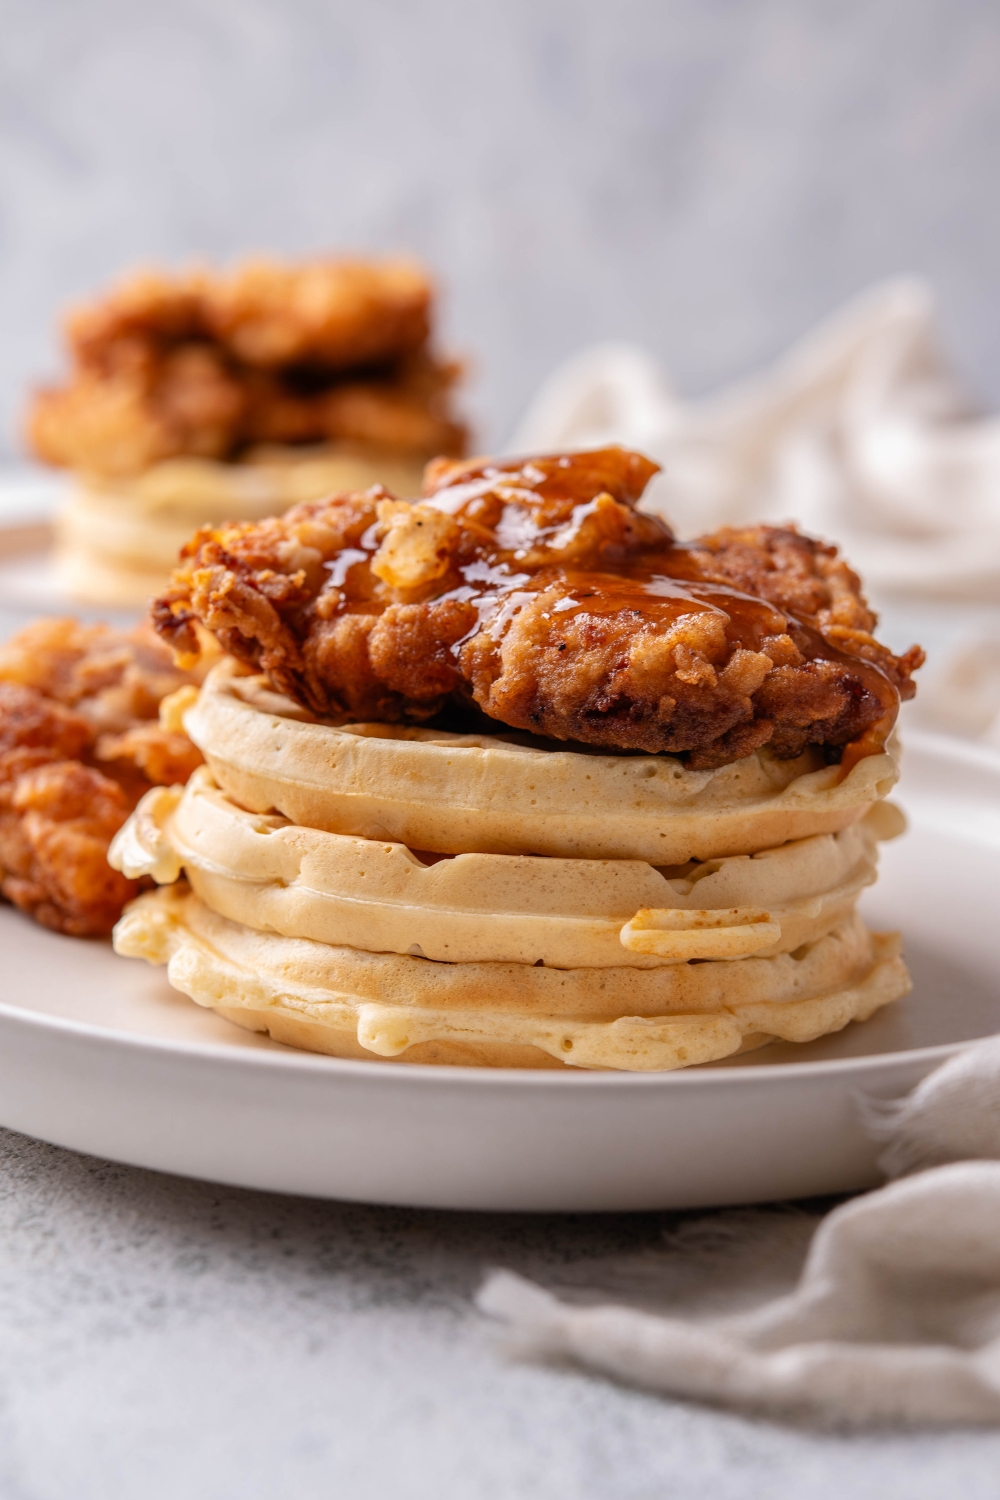 A stack of three waffles with a piece of fried chicken on top covered in a glaze. There is a second piece of fried chicken next to the stack of waffles.